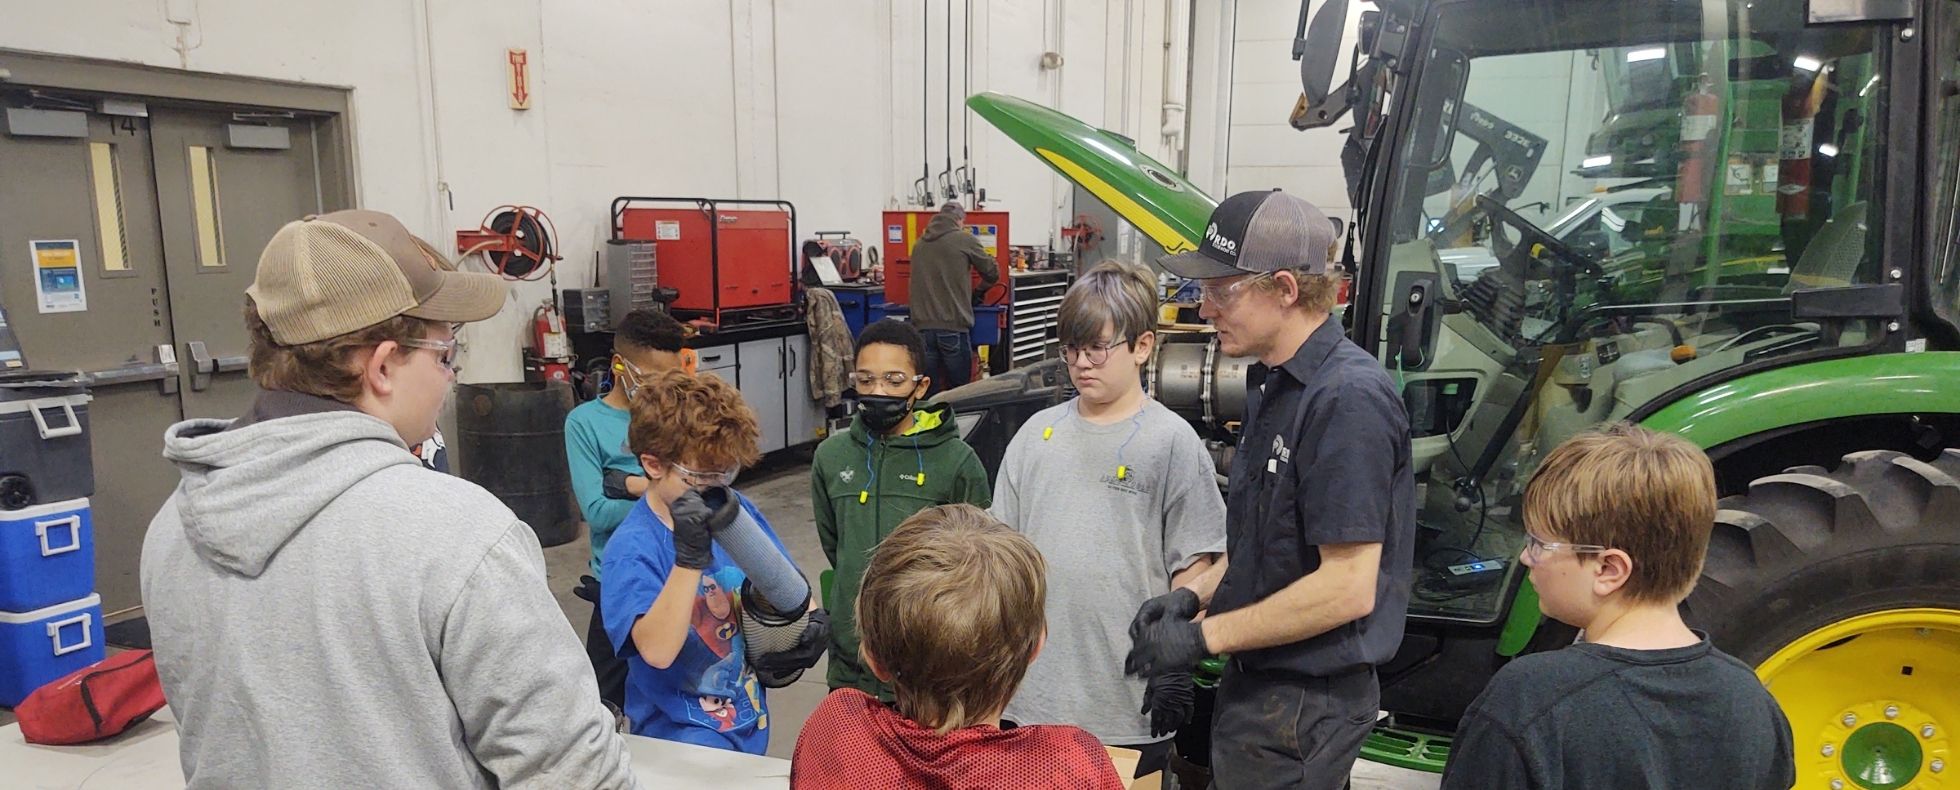 Moorhead Team Welcomes Boy Scouts for Merit Badge Opportunity